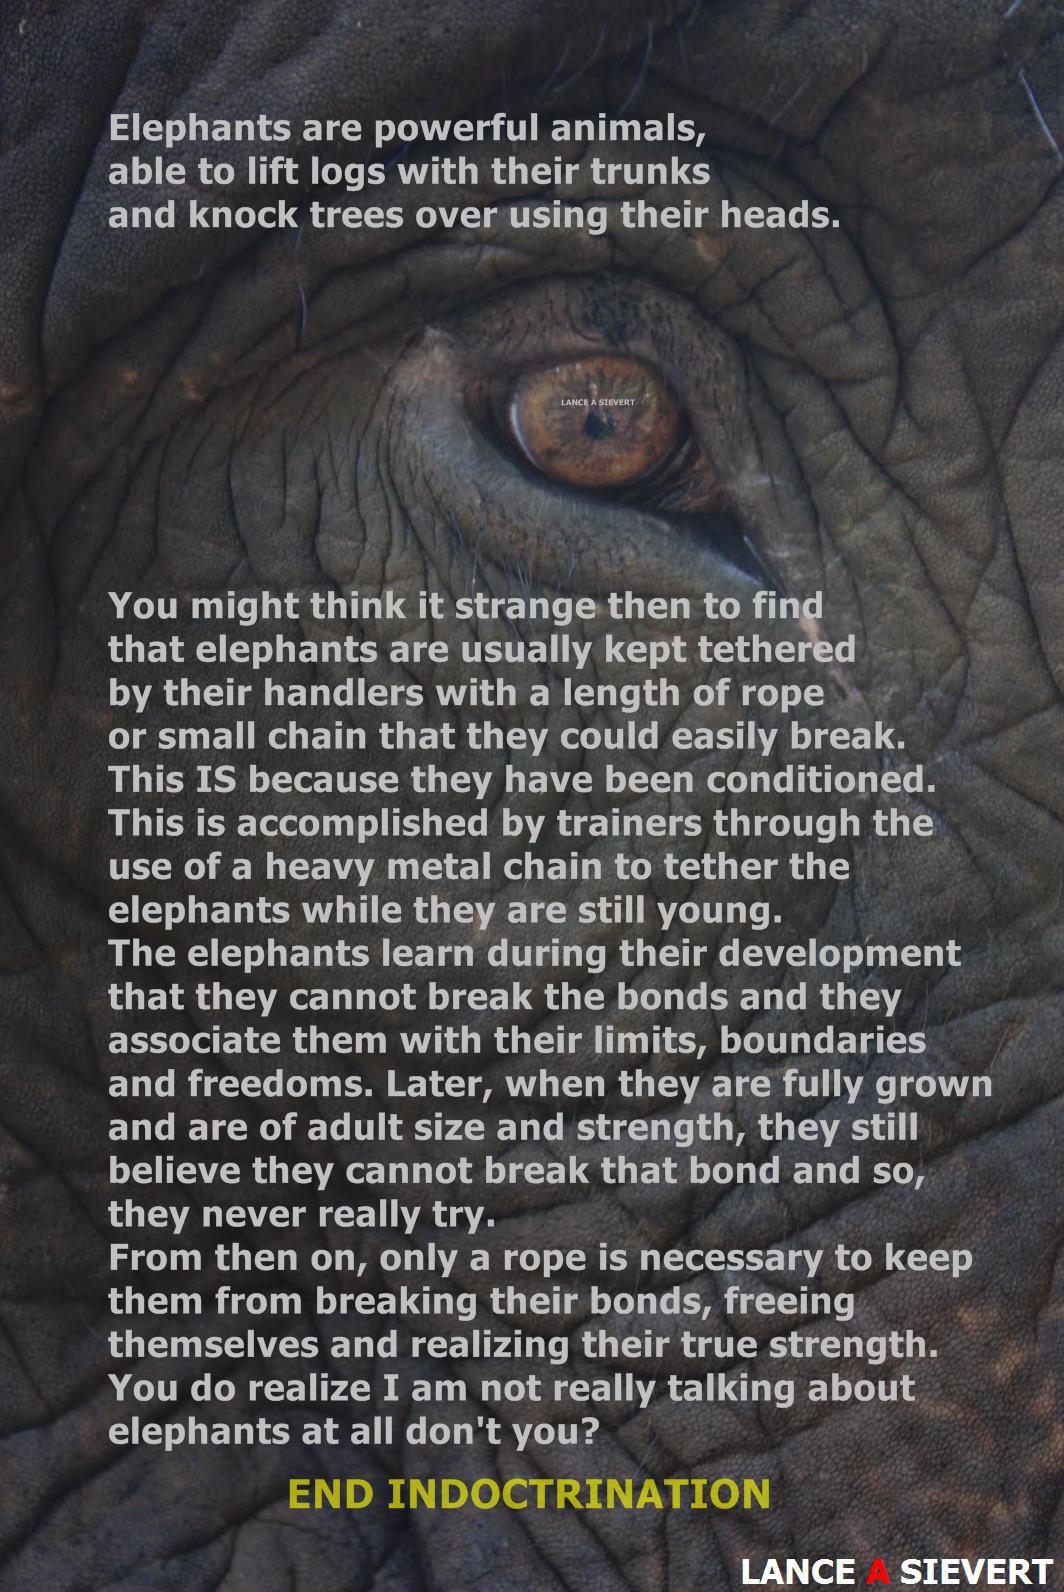 elephants are powerful animals - Elephants are powerful animals, able to lift logs with their trunks and knock trees over using their heads. Lance A Sievert You might think it strange then to find that elephants are usually kept tethered by their handlers